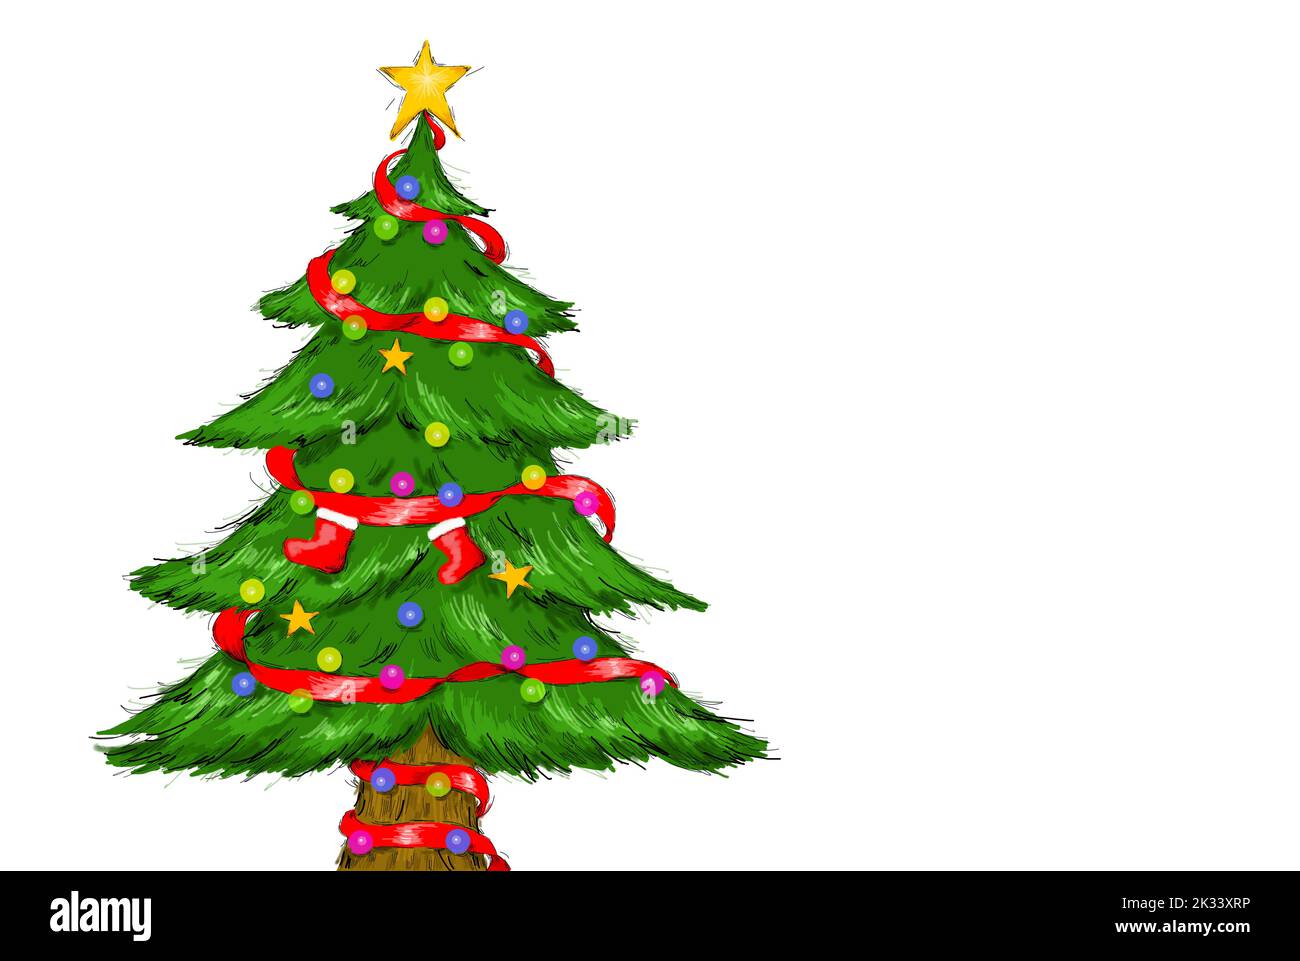 One Decorated Green Christmas Tree Isolated on White Background. Stock Photo